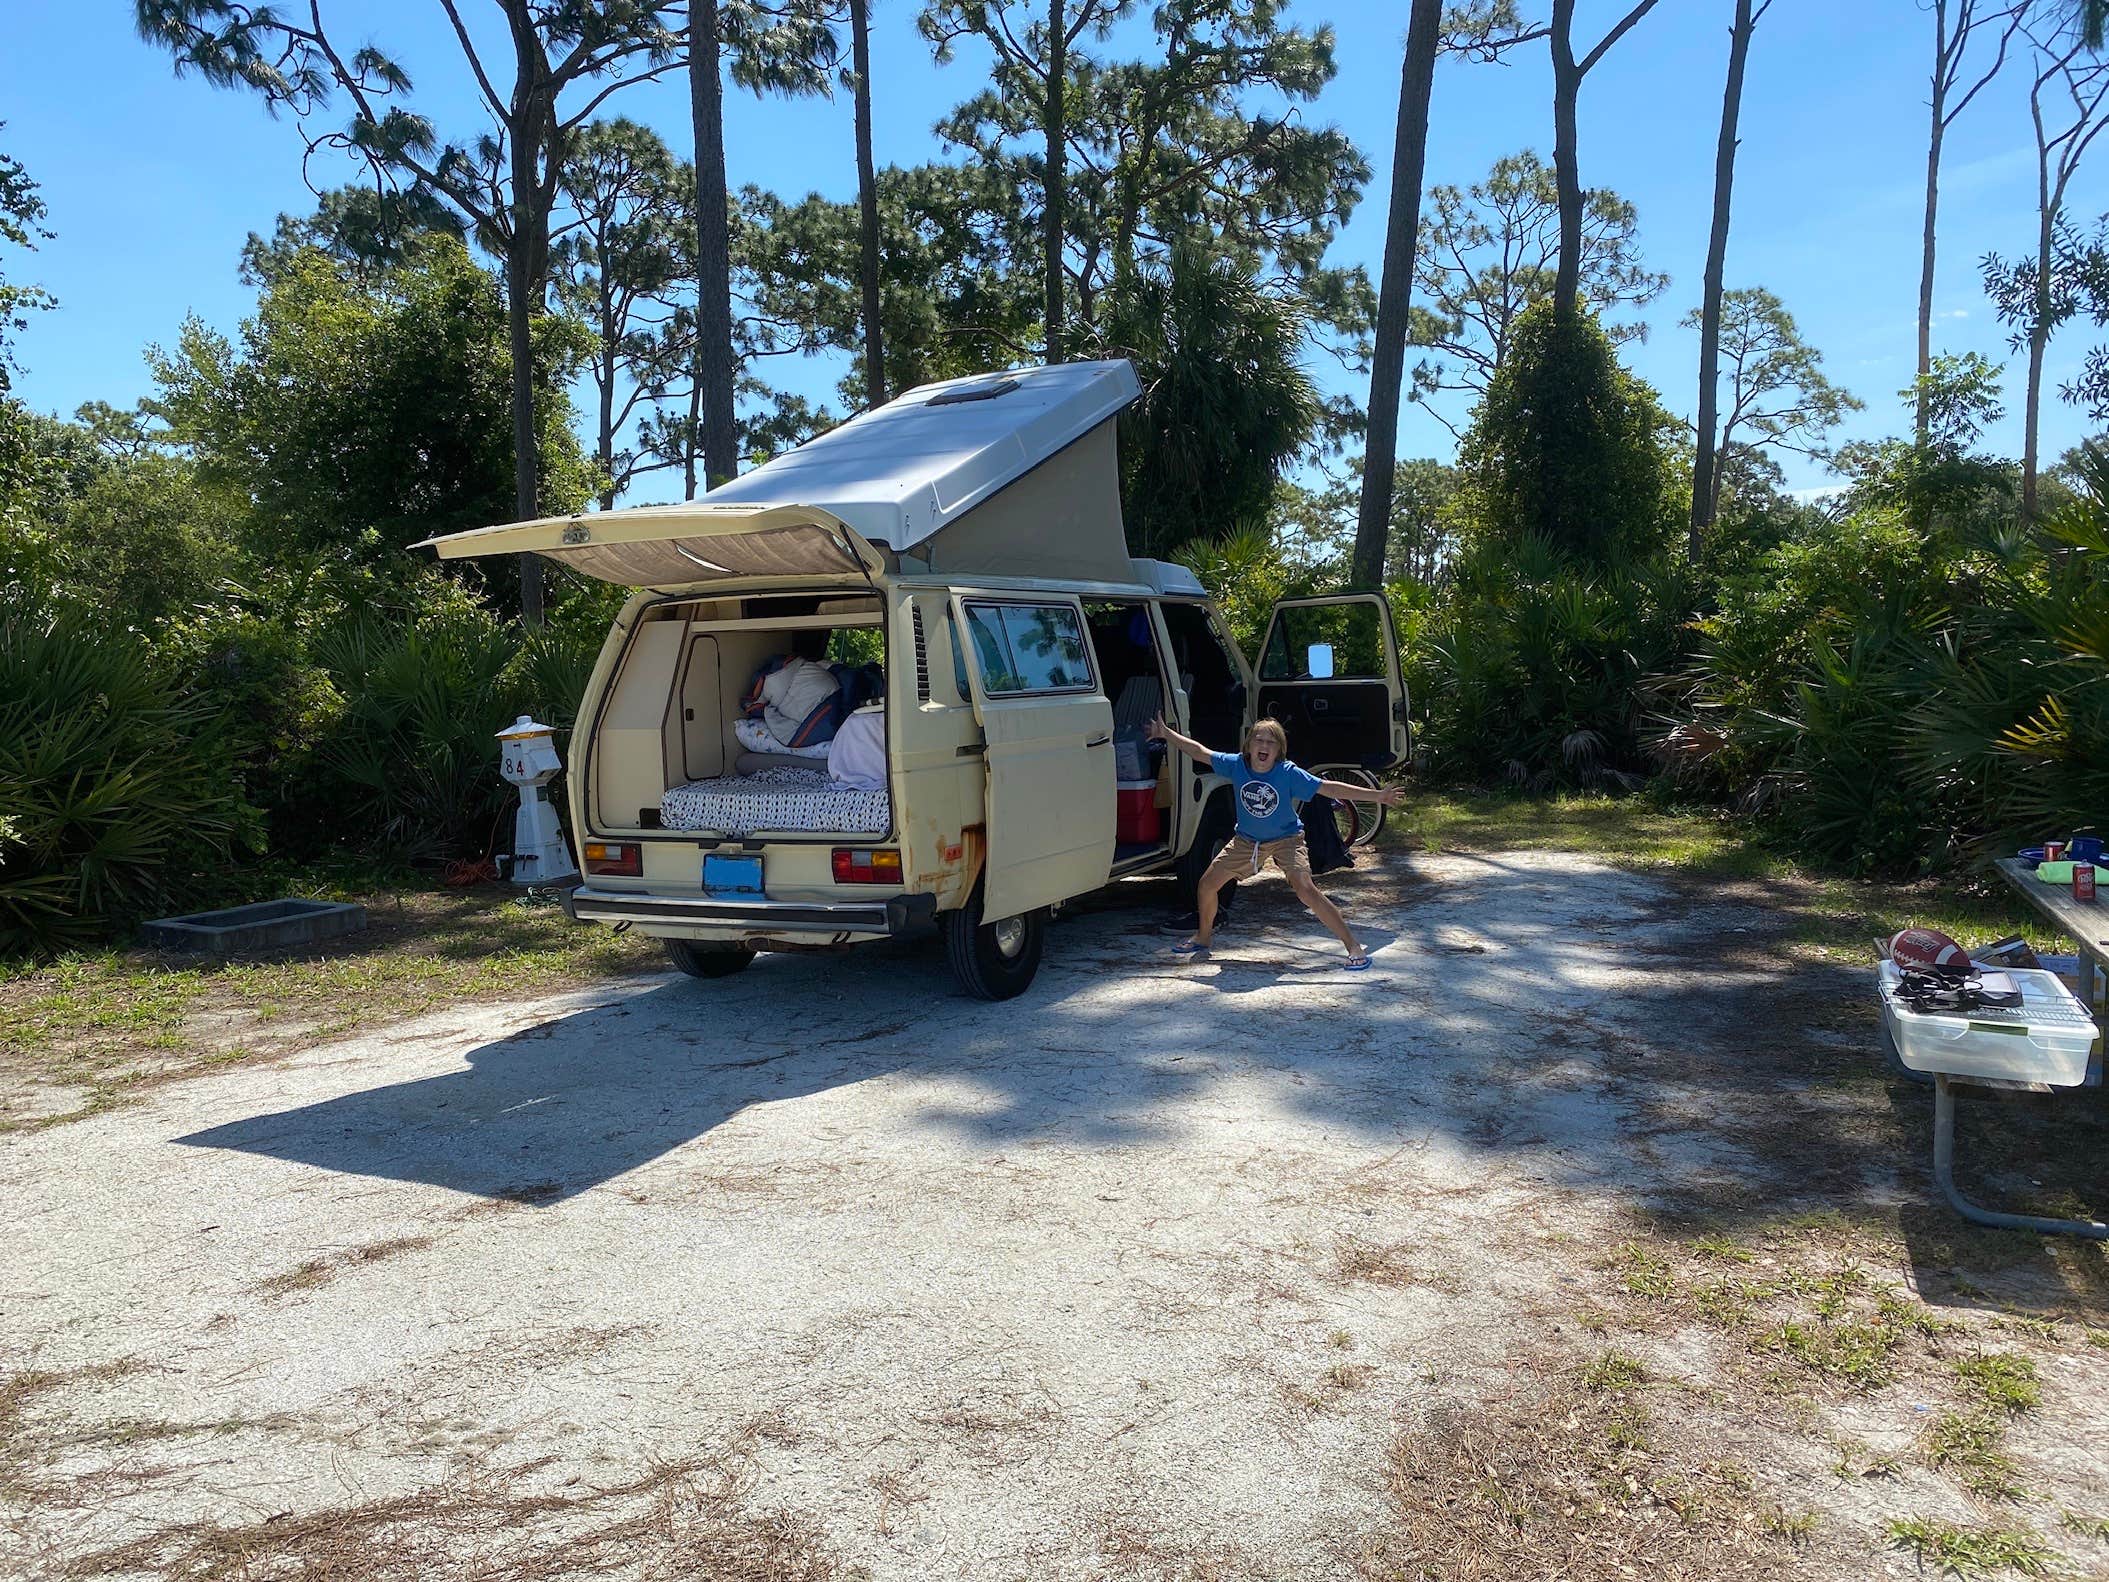 Camper submitted image from Wickham Park Campground - 4